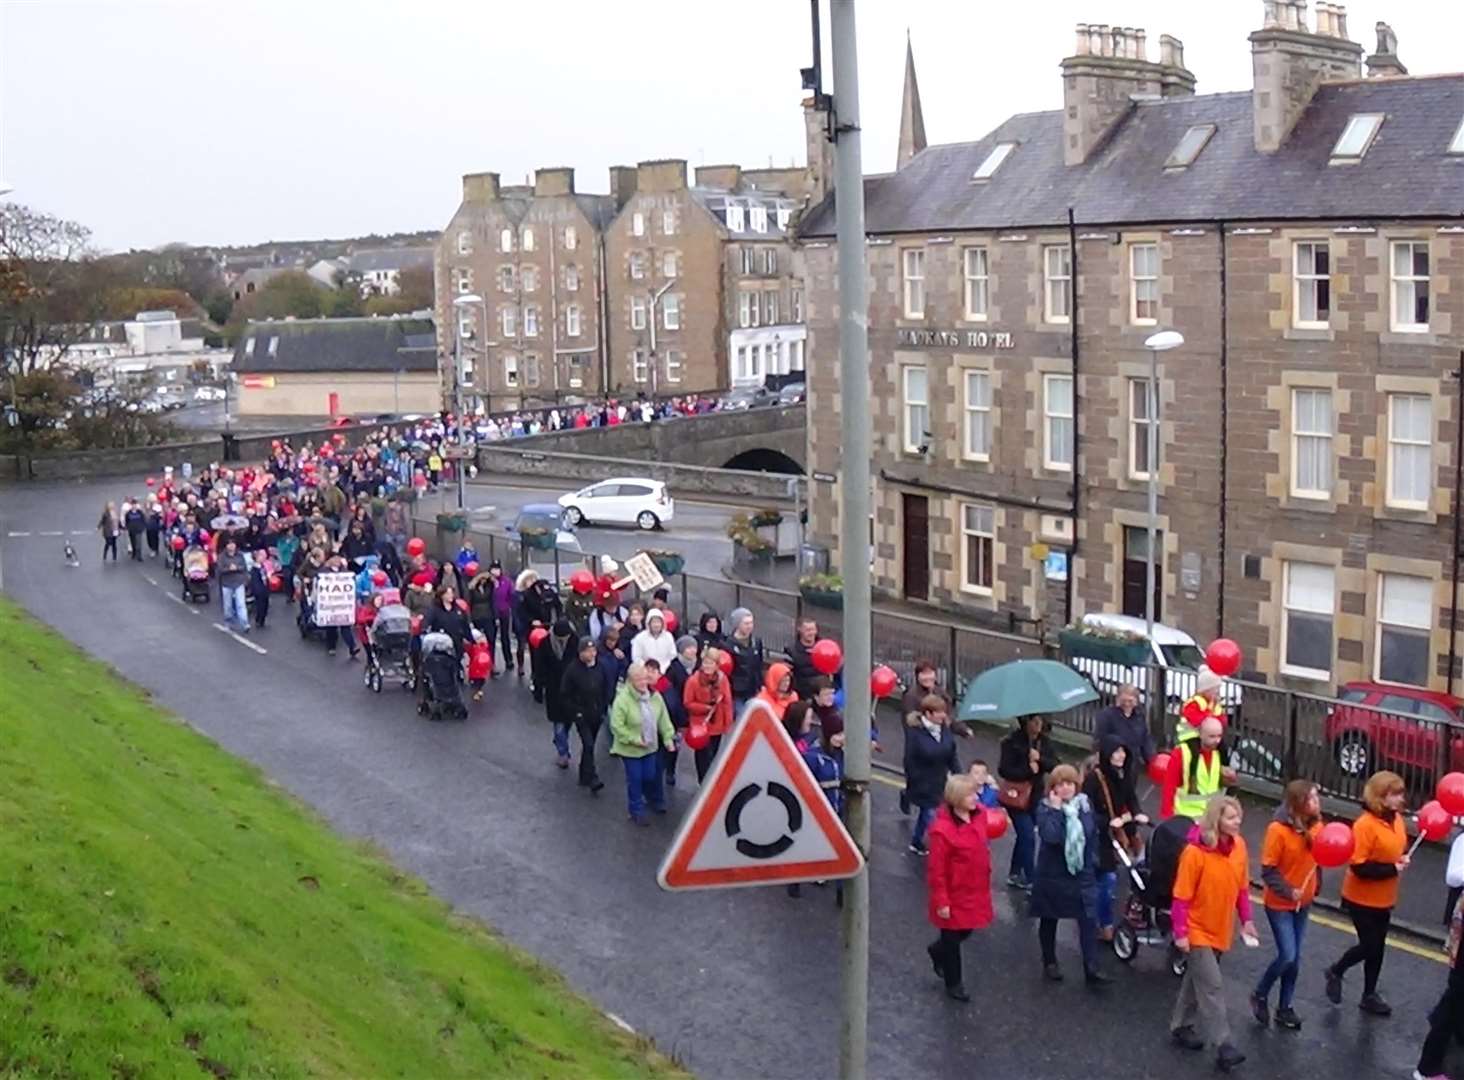 An estimated 500 people took part in the bedpush protest in October. Photo: Will Clark